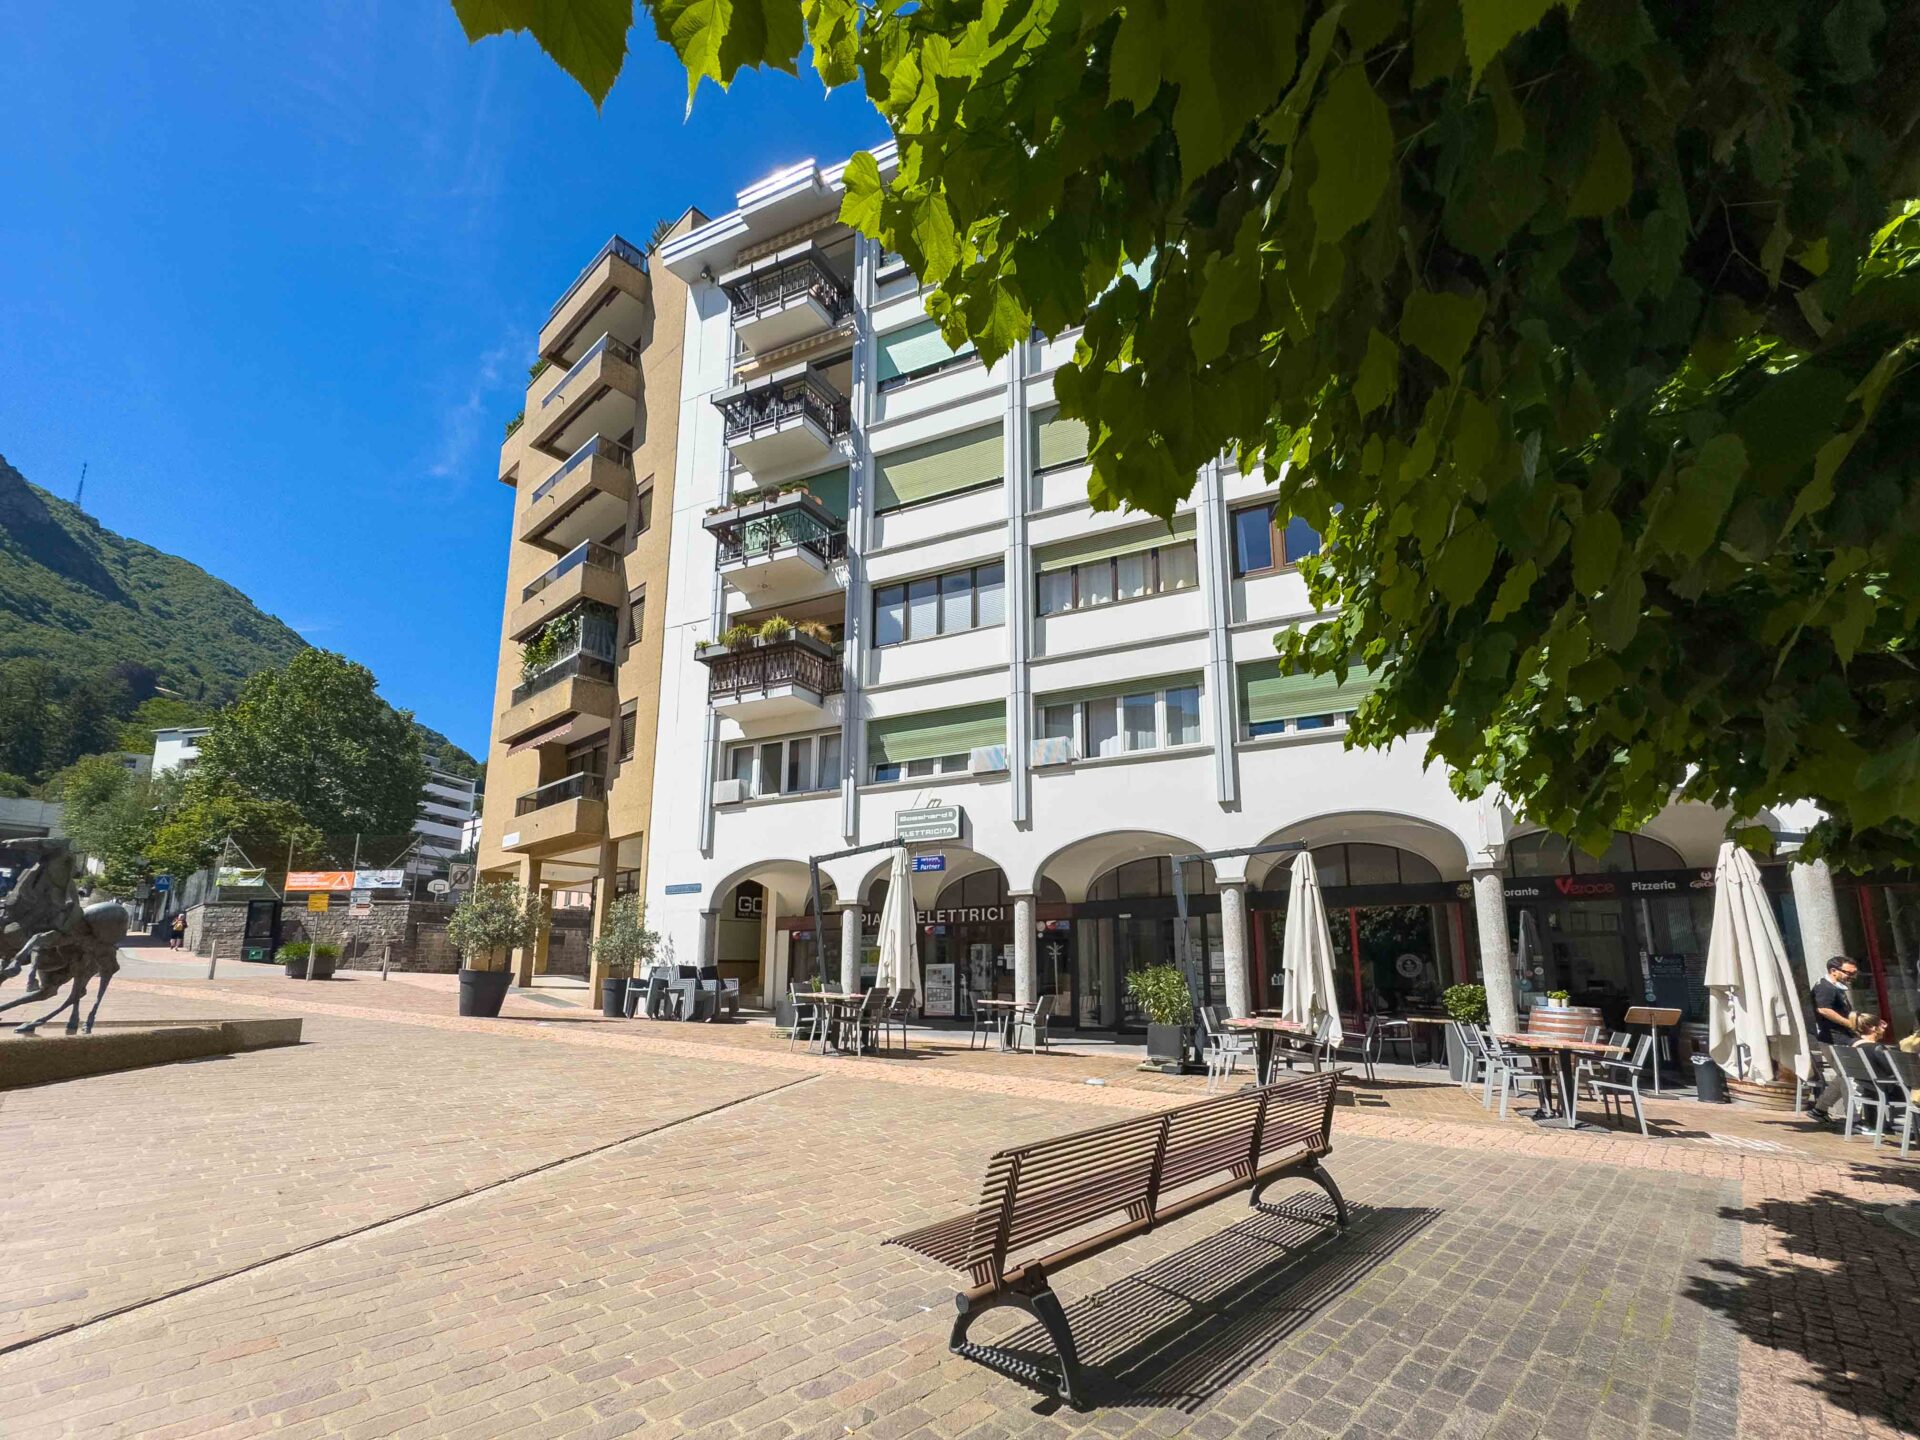 Apartment for sale in Paradiso in a building within walking distance of the lake